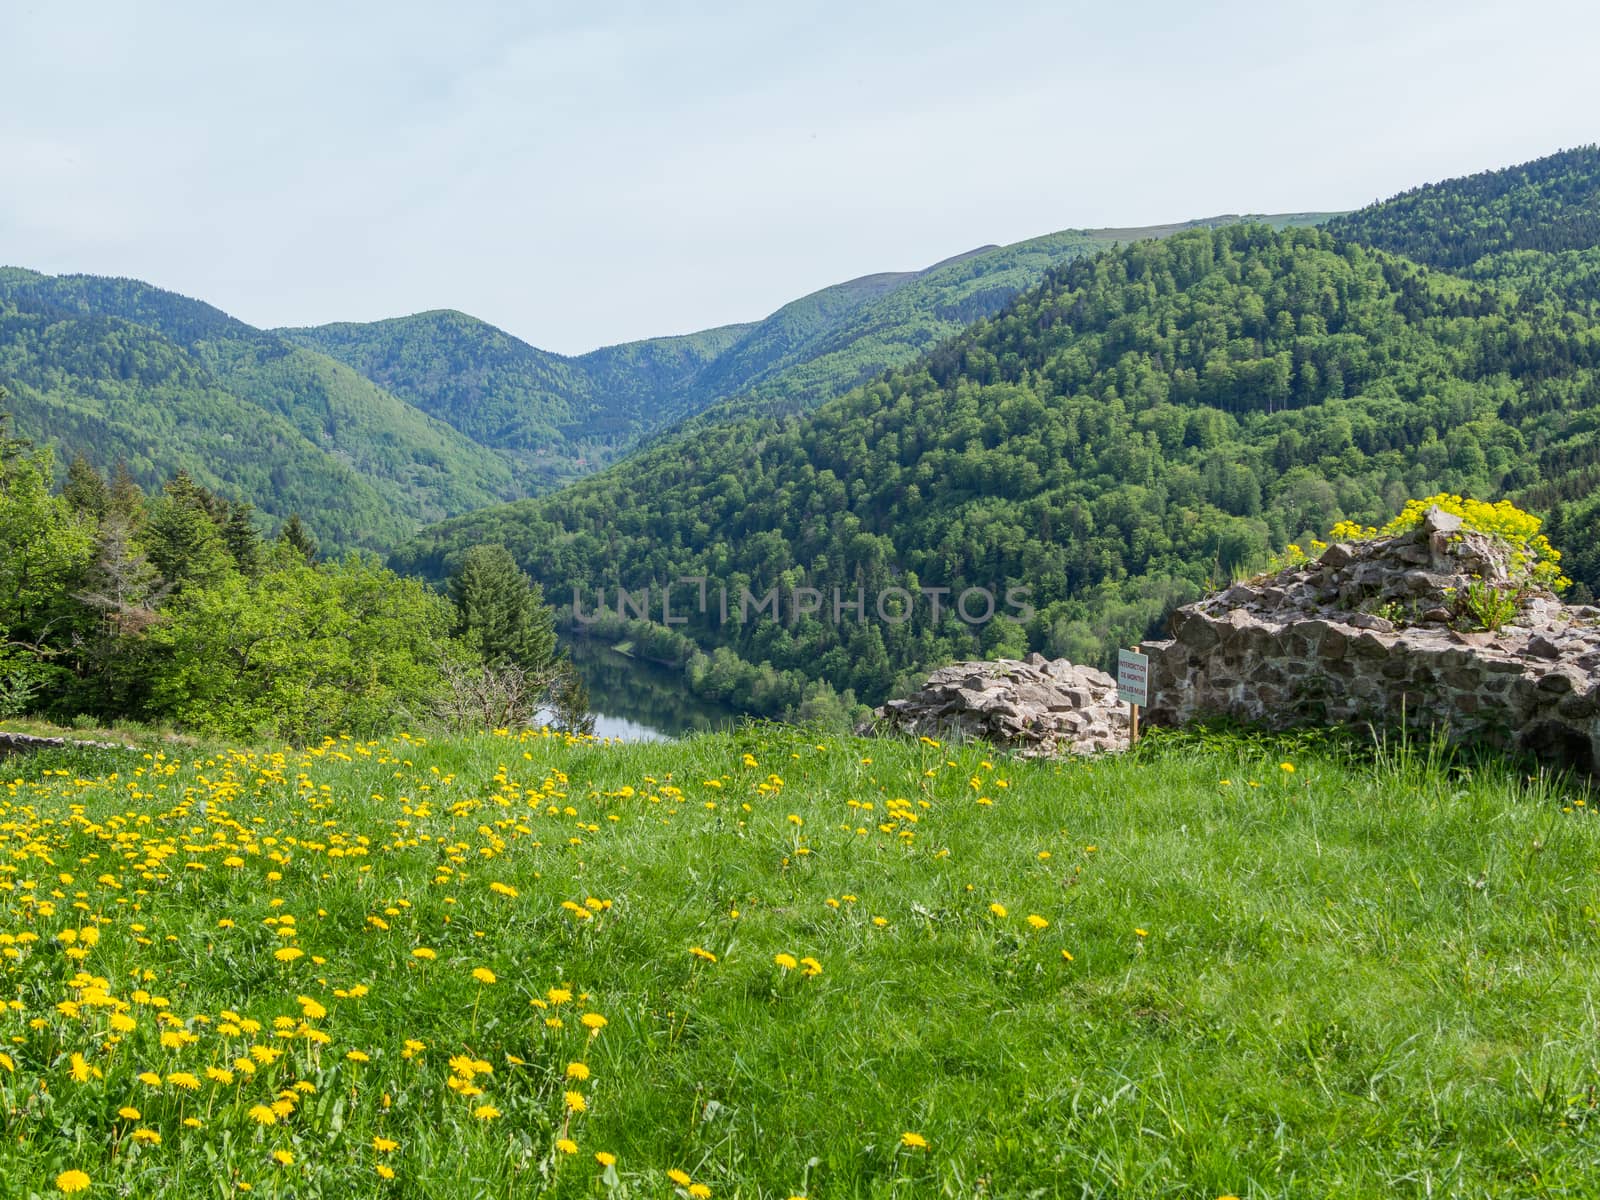 Lake in valley from a high perspective looking past a field of yellow flowers and over old ruins wall